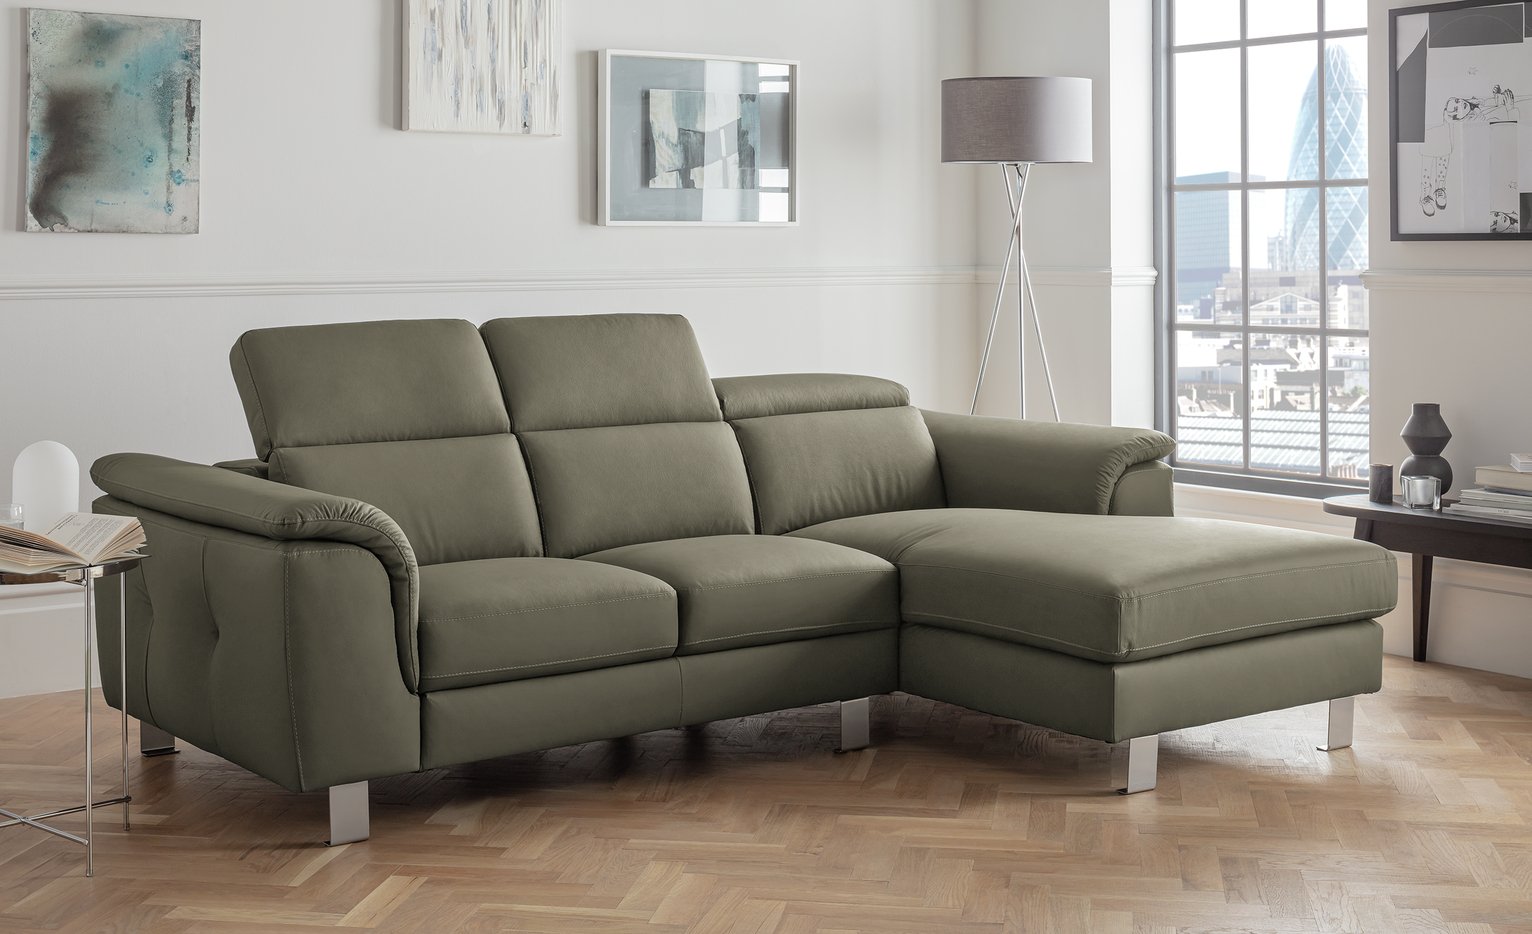 Argos Home Boutique Right Corner Faux Leather Sofa Review